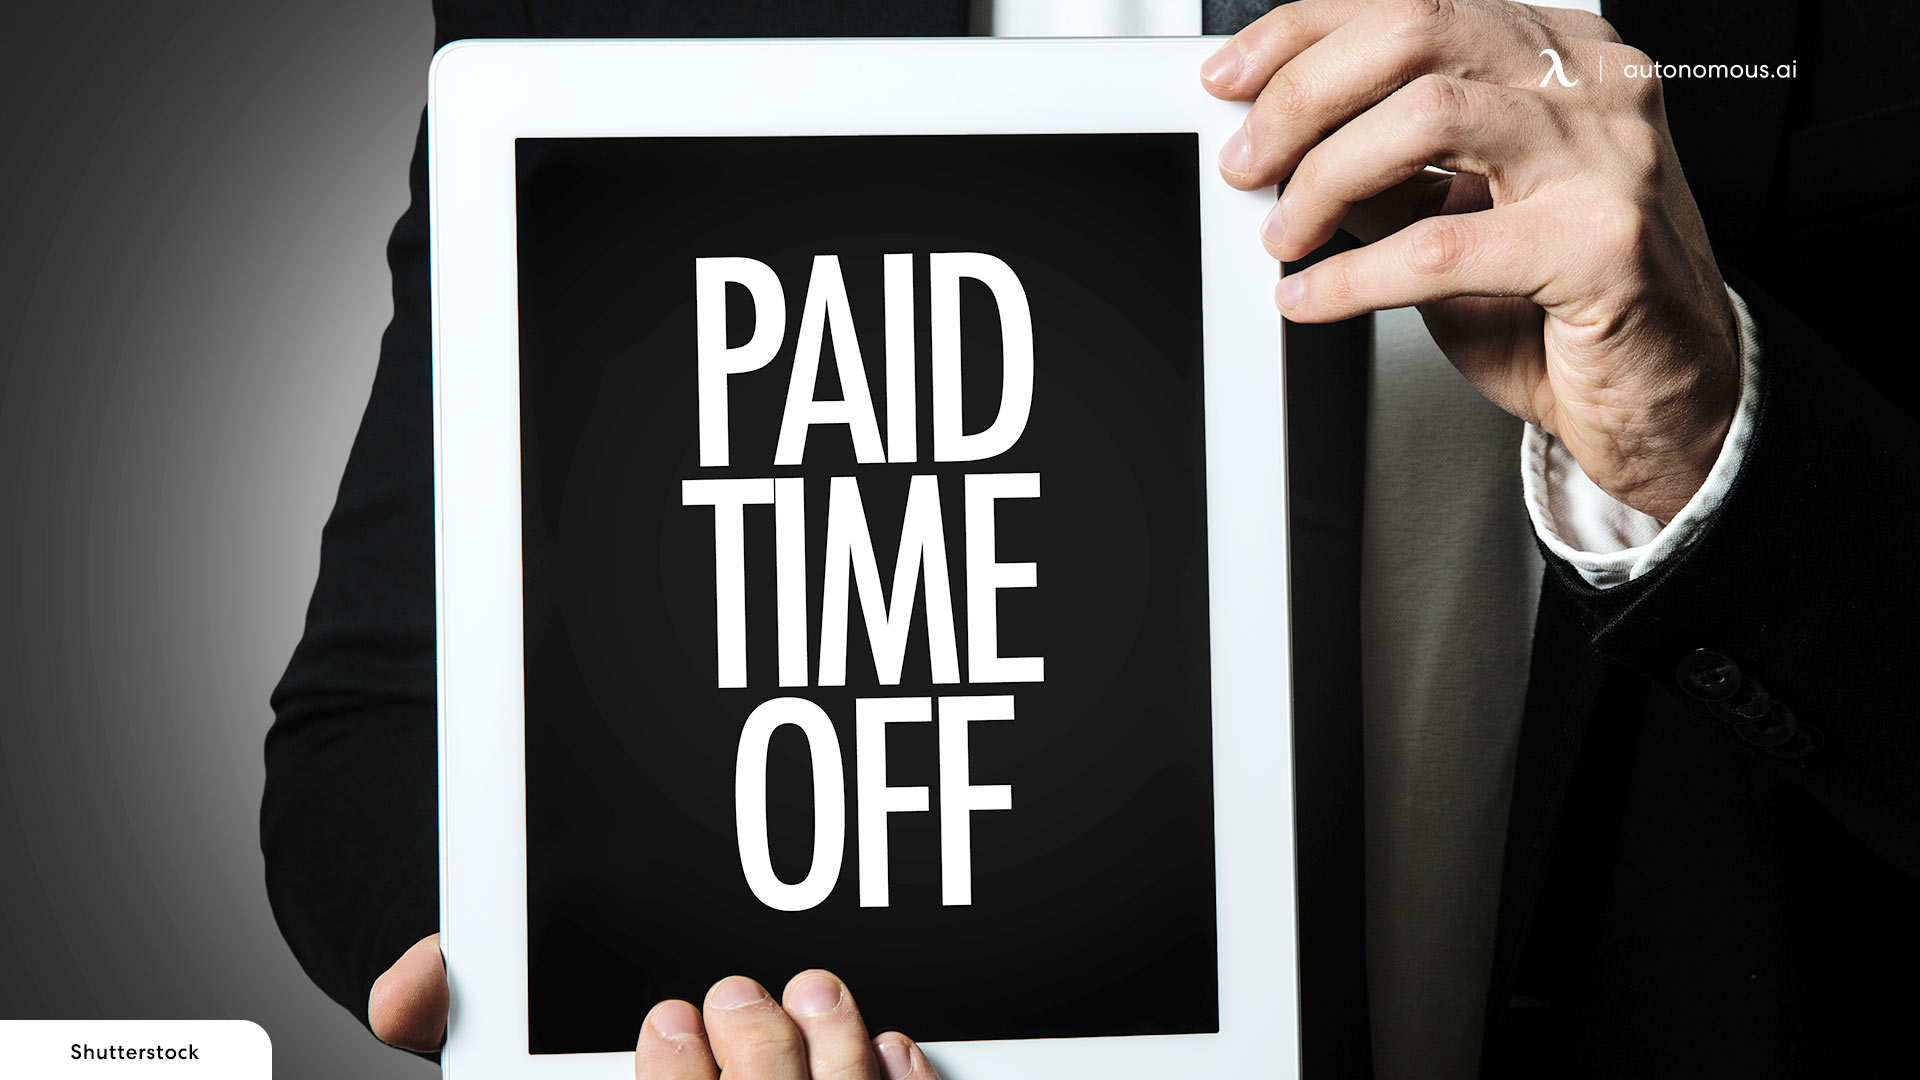 Categories of employee benefits: Paid time off